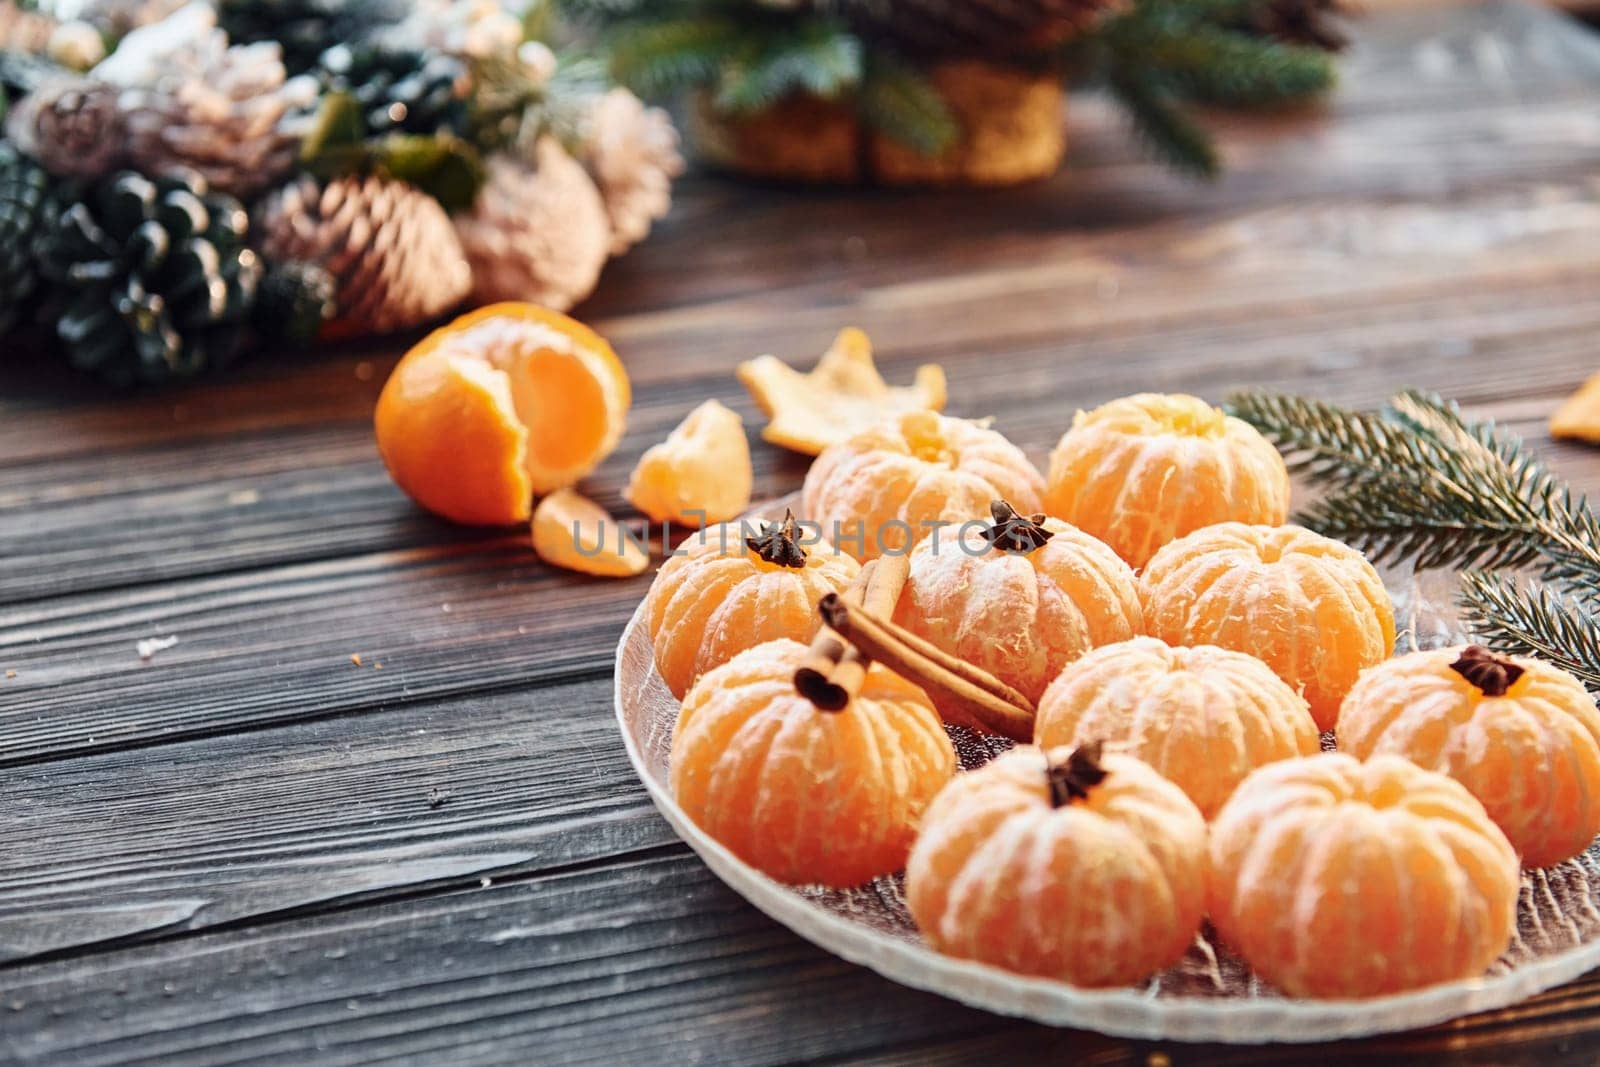 Many of the oranges. Christmas background with holiday decoration by Standret